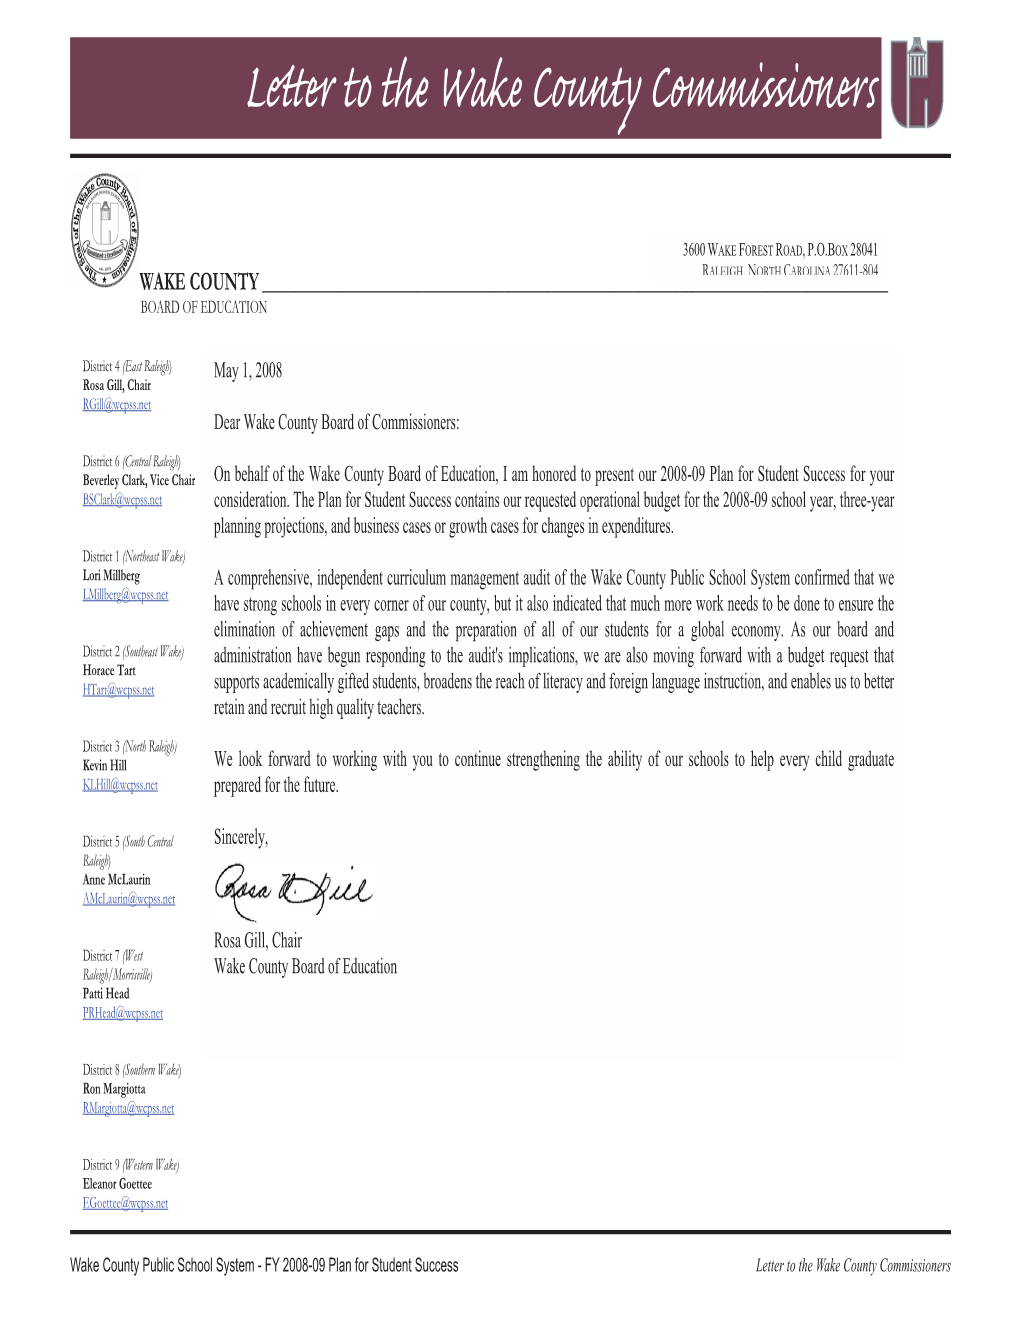 Letter to the Wake County Commissioners Contents 2008-09 Adopted Plan for Student Success